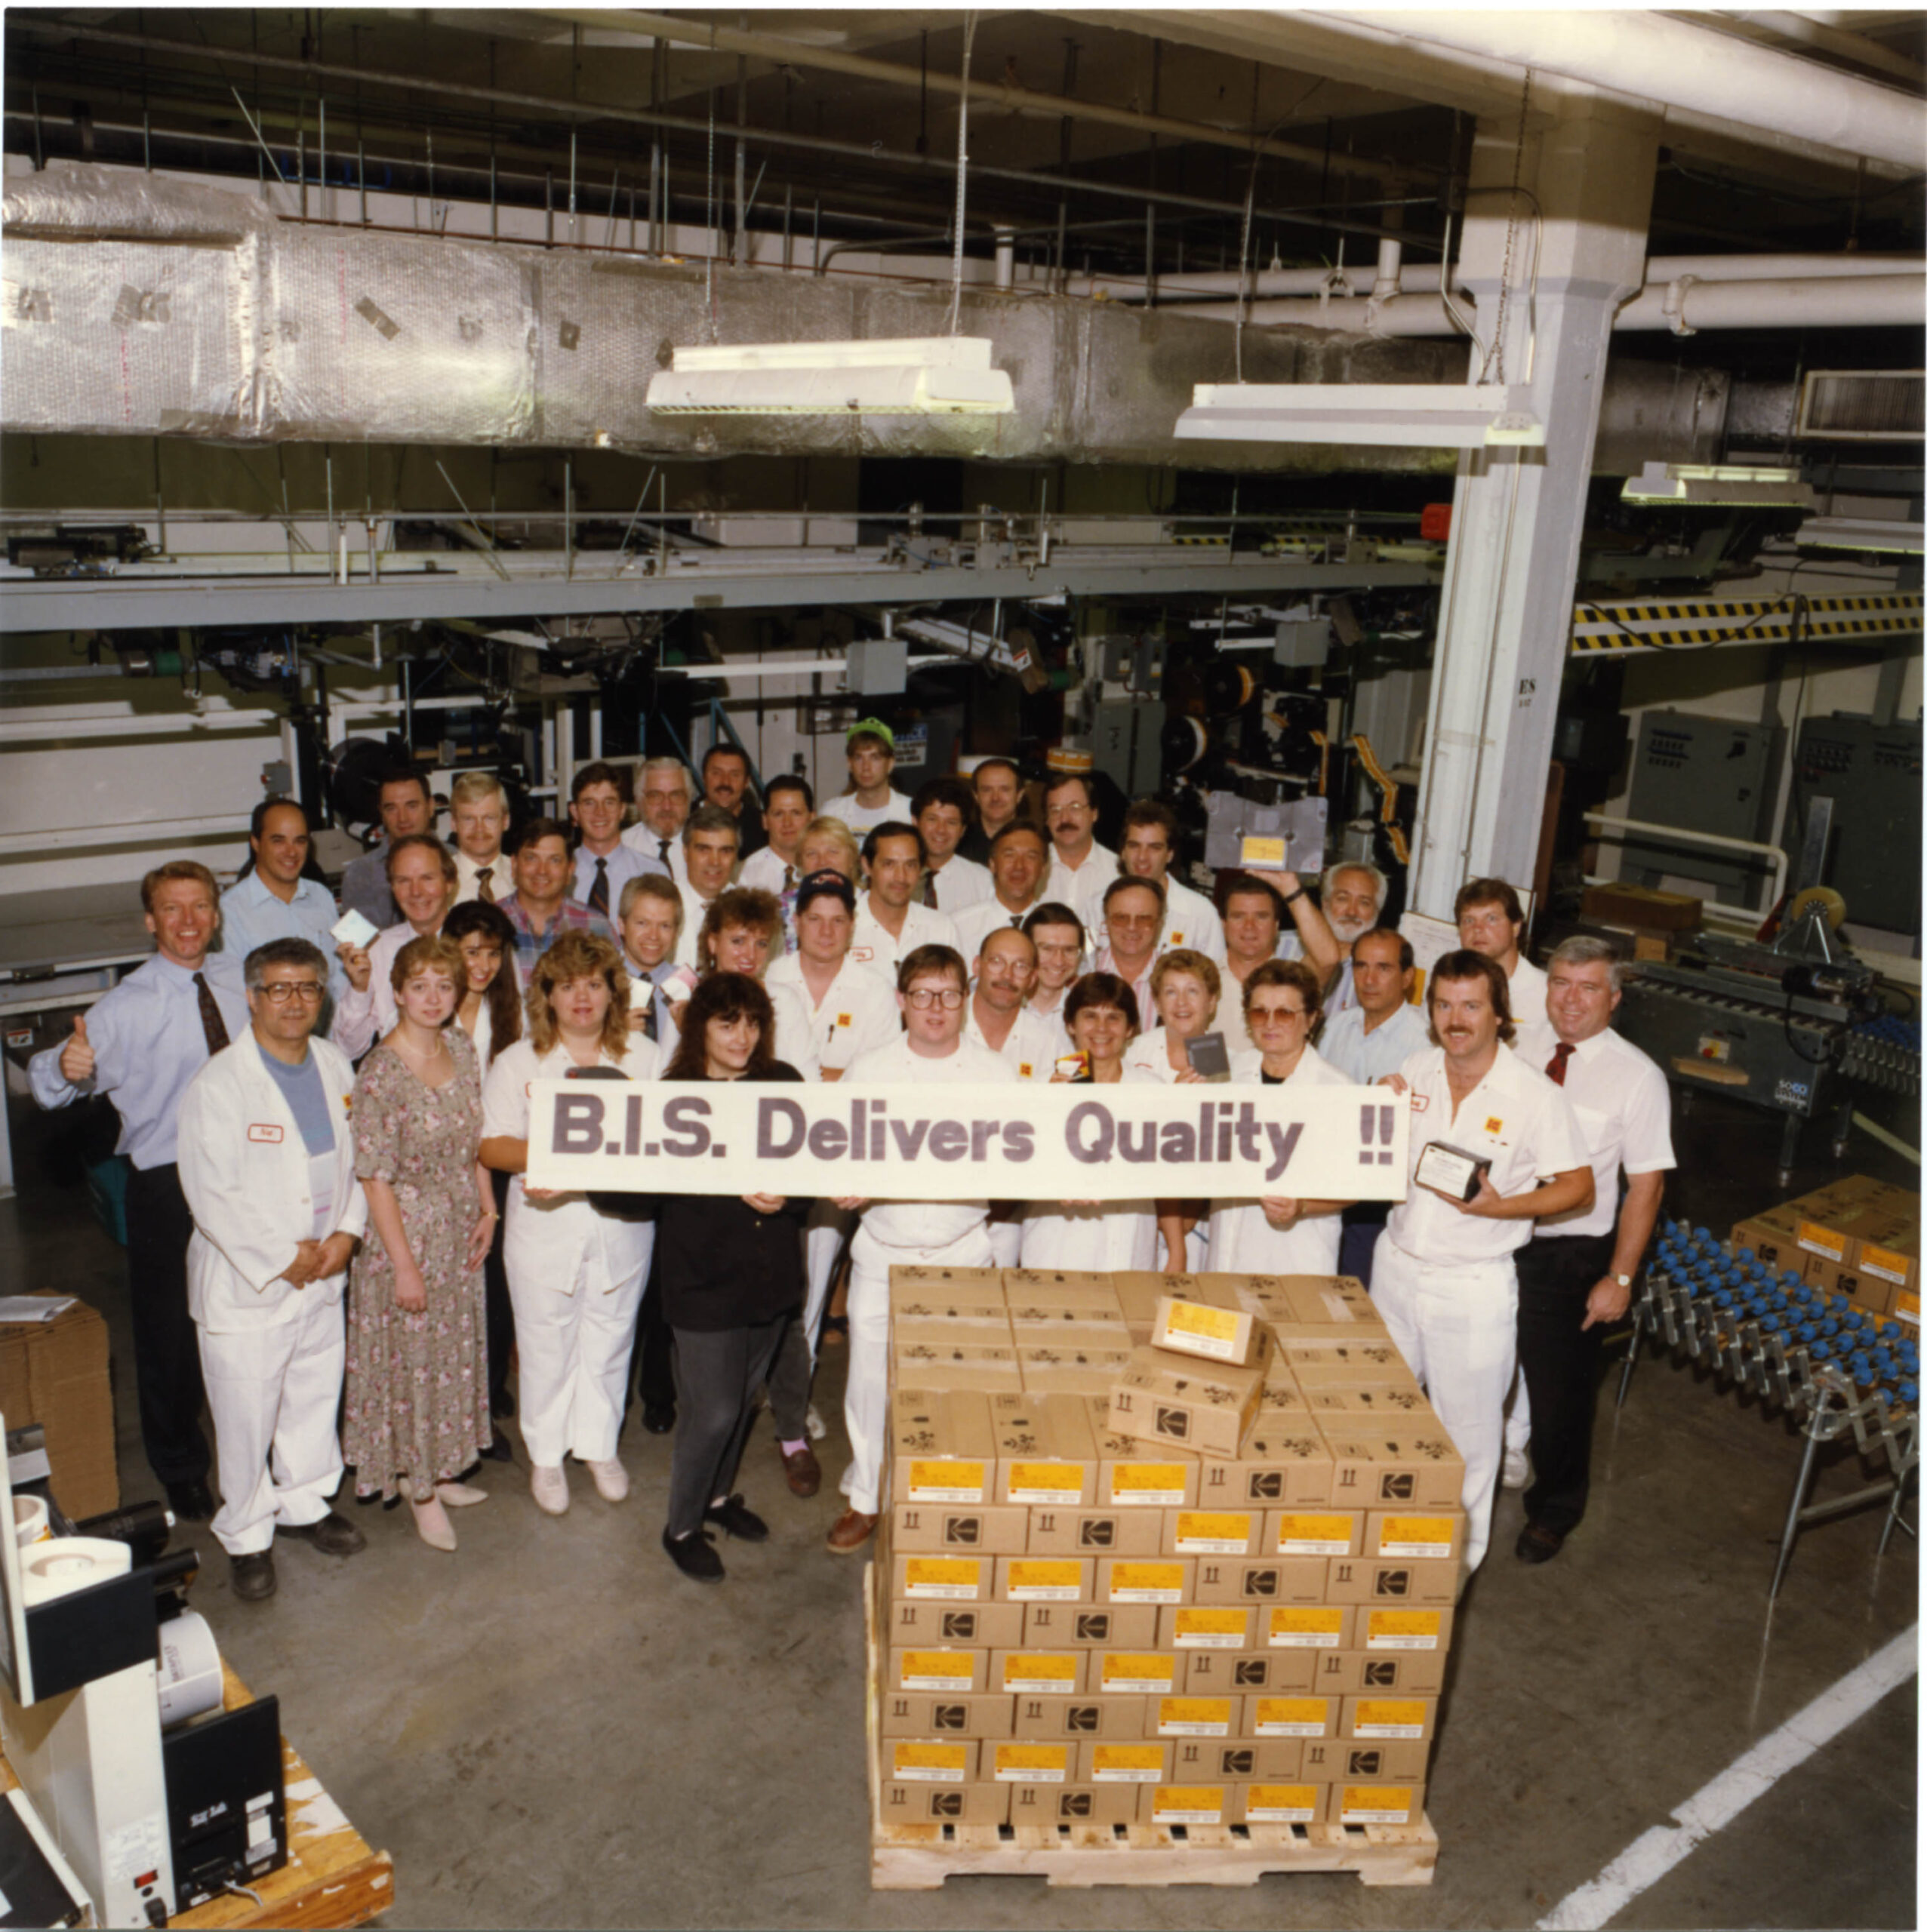 Group of individuals from Kodak's Business Imaging Systems (B.I.S.) team holding a banner that says "B.I.S. Delivers Quality"